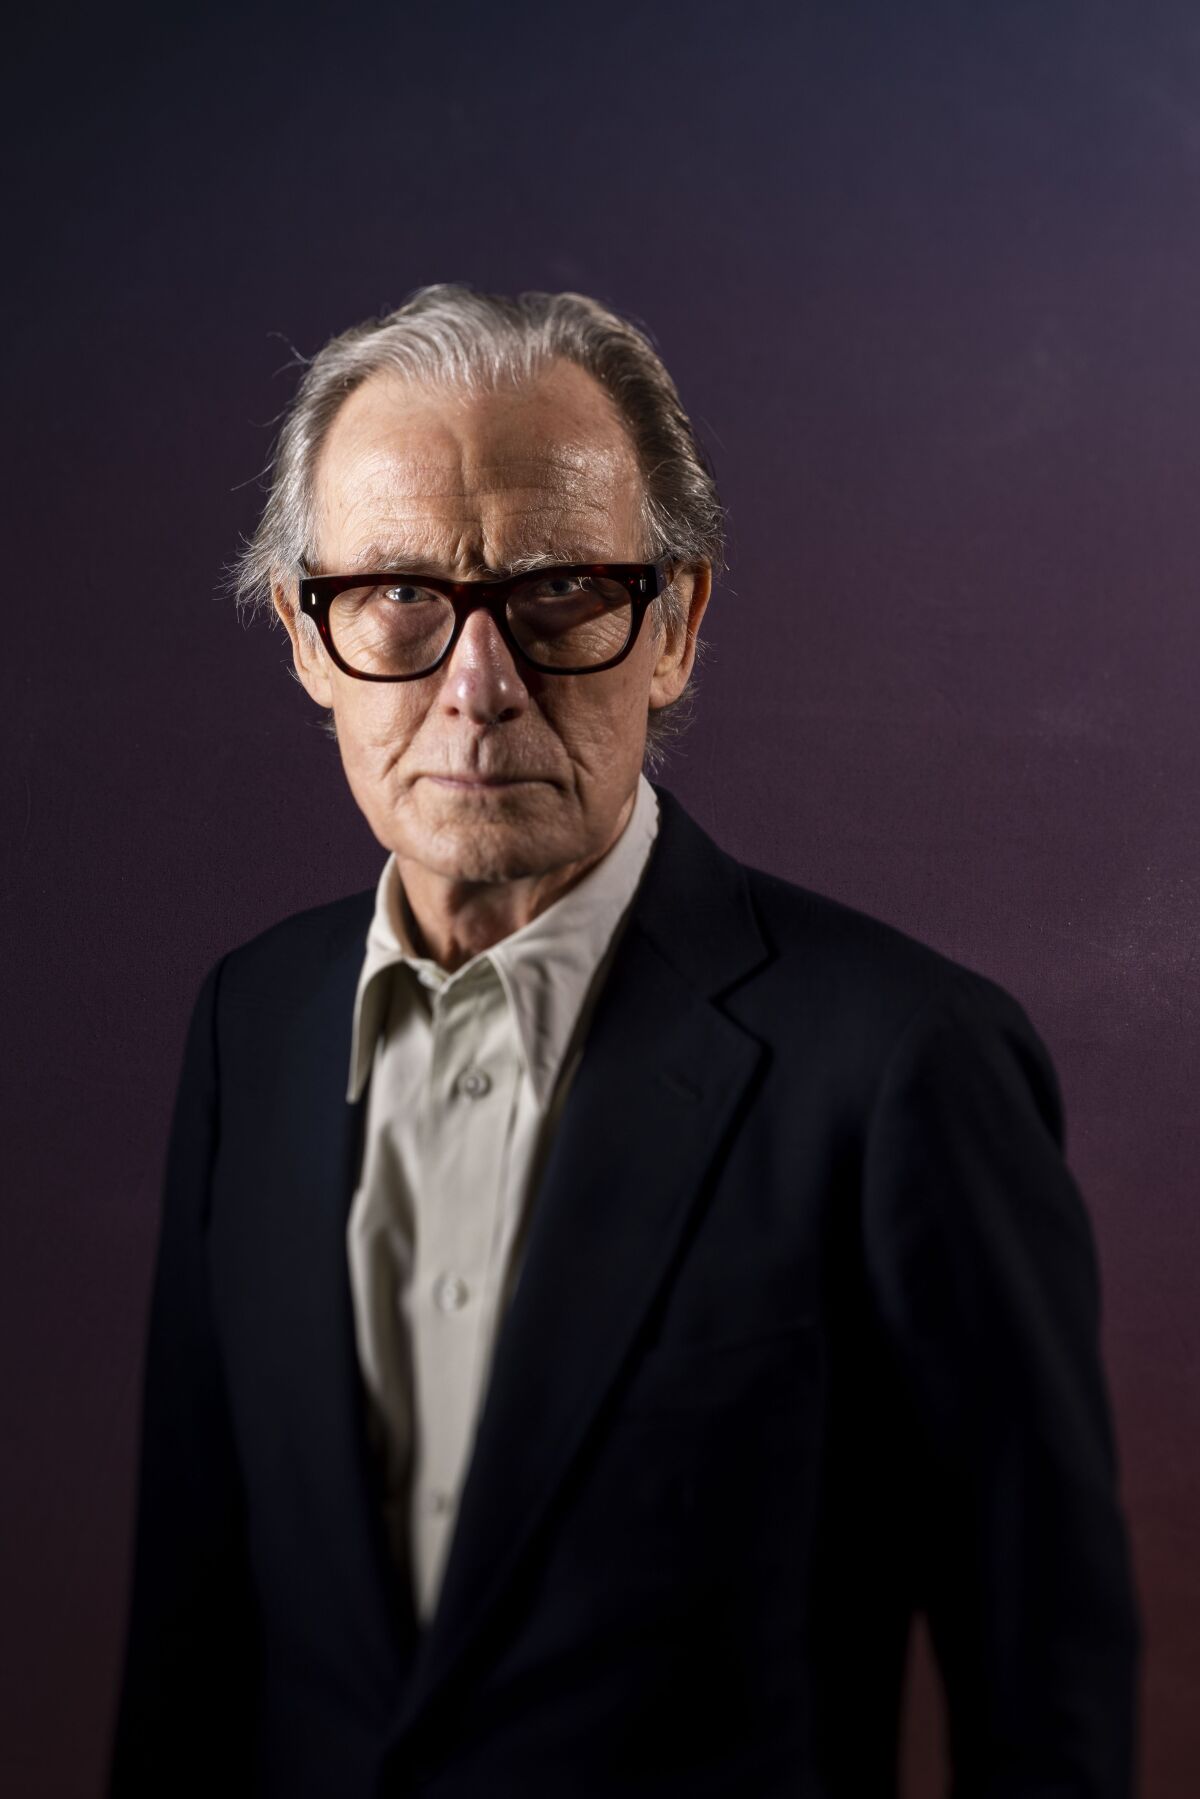 Bill Nighy wears a gray shirt and black jacket for a portrait.